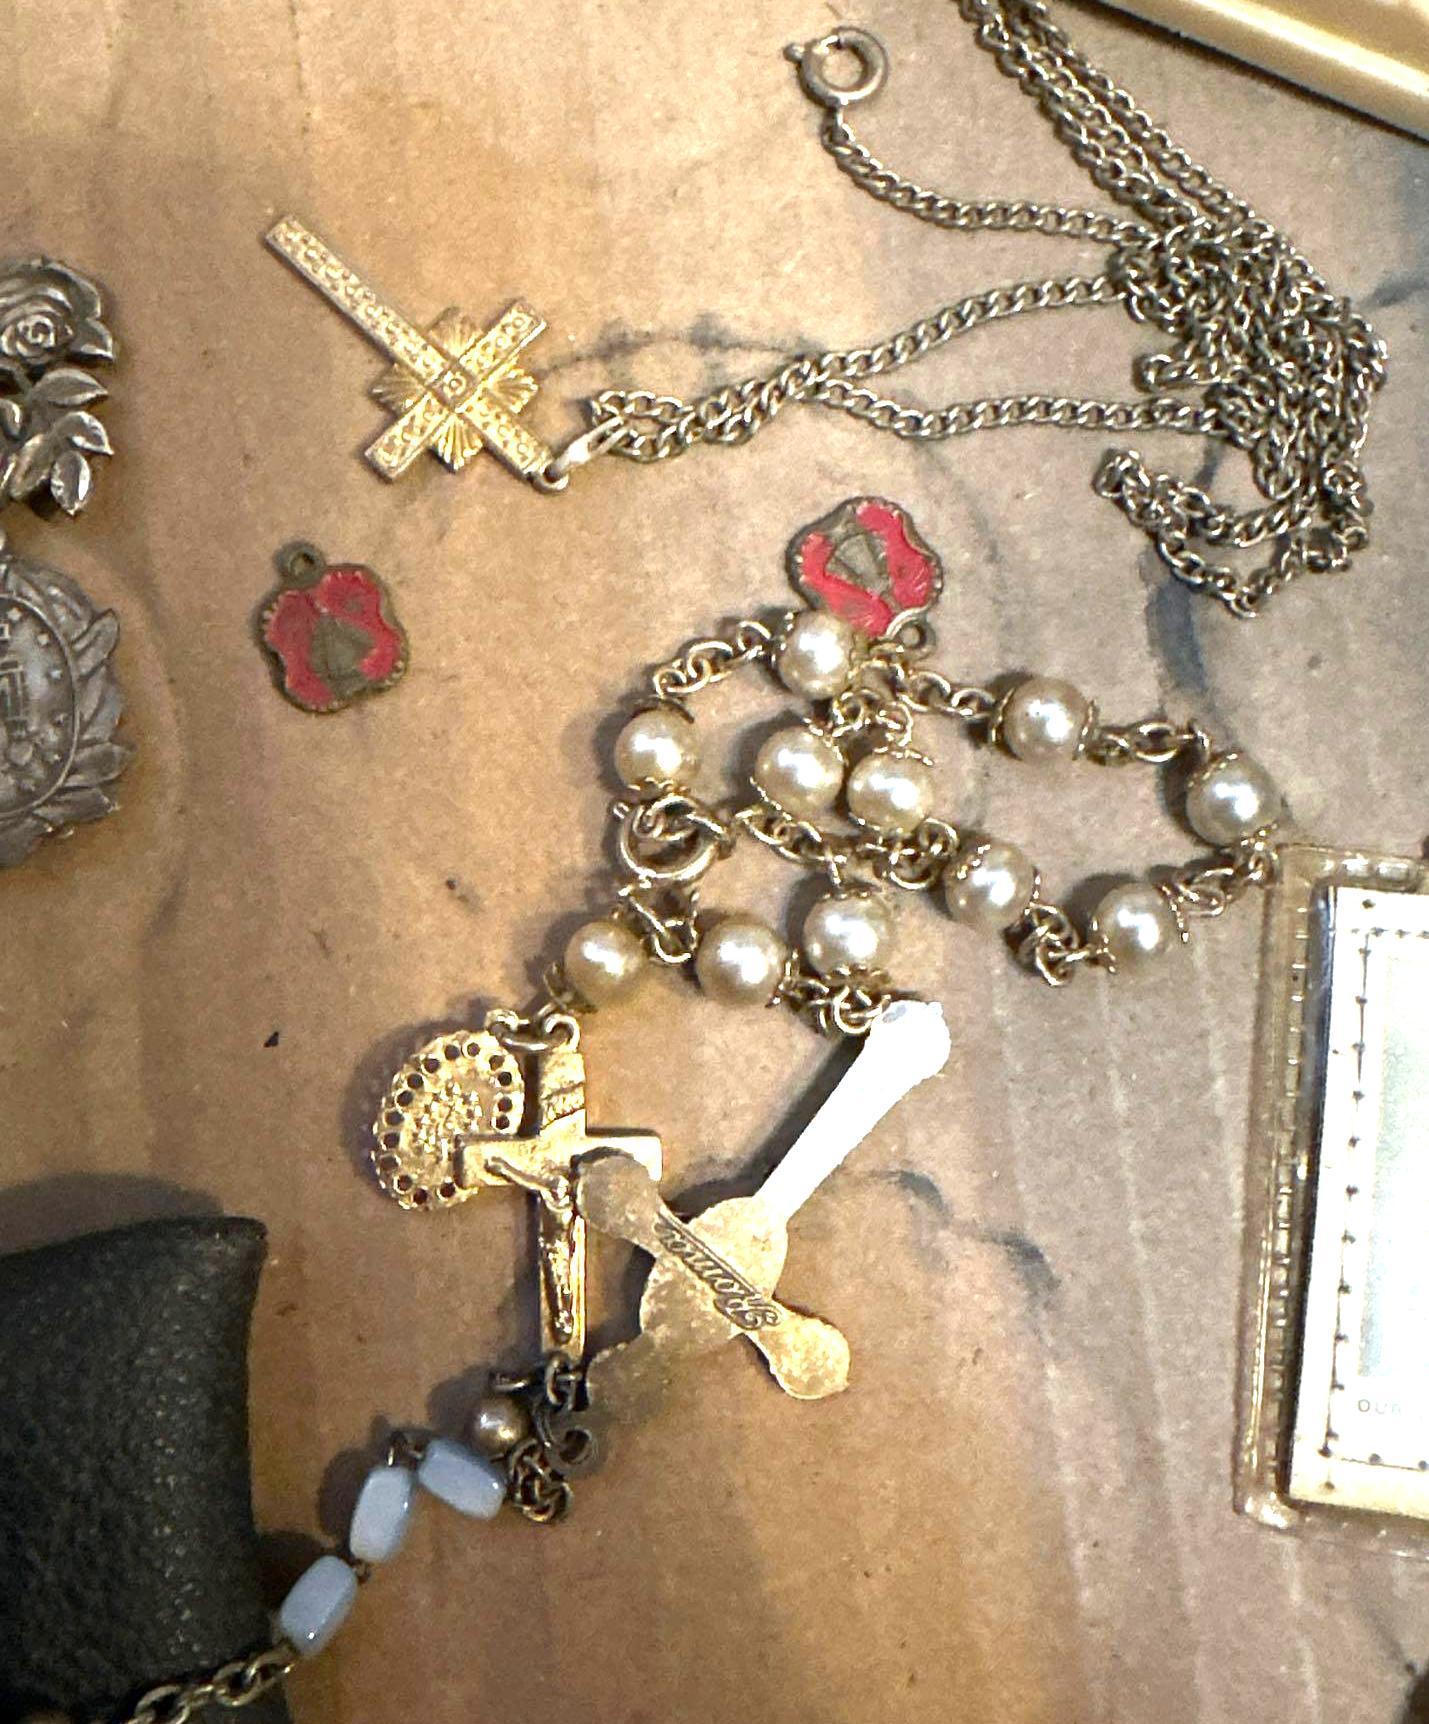 Lot of Religious Items- some Sterling